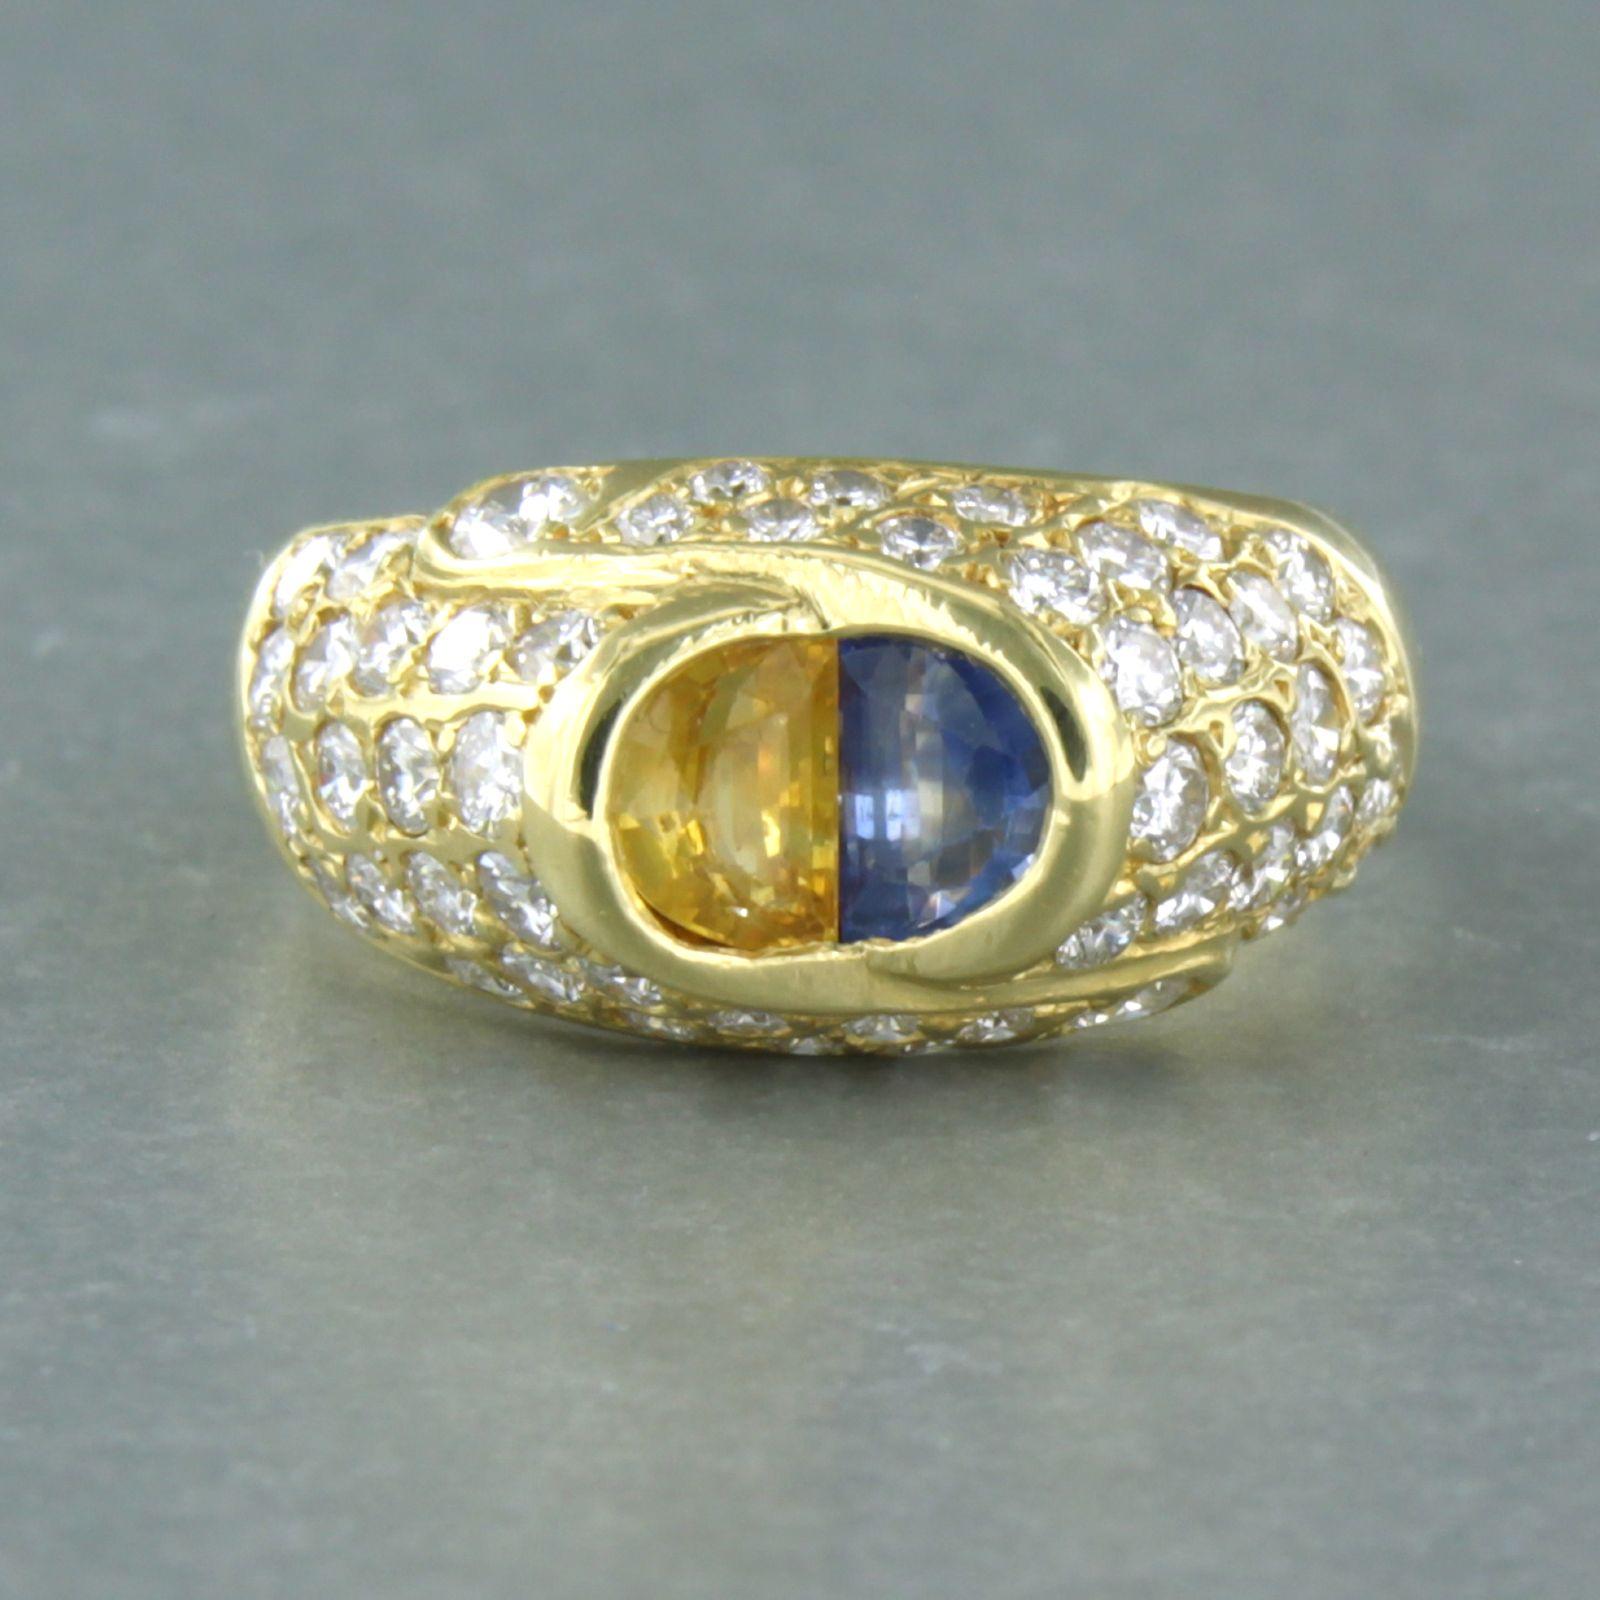 18k yellow gold ring set with yellow and blue sapphires, and brilliant cut diamonds. 1.50ct -F/G - VS/SI - ring size U.S. 6.5 – EU. 17(53)

detailed description:

The top of the ring is 1.0 cm wide

Ring size U.S. 6.5 – EU. 17(53), the ring can be